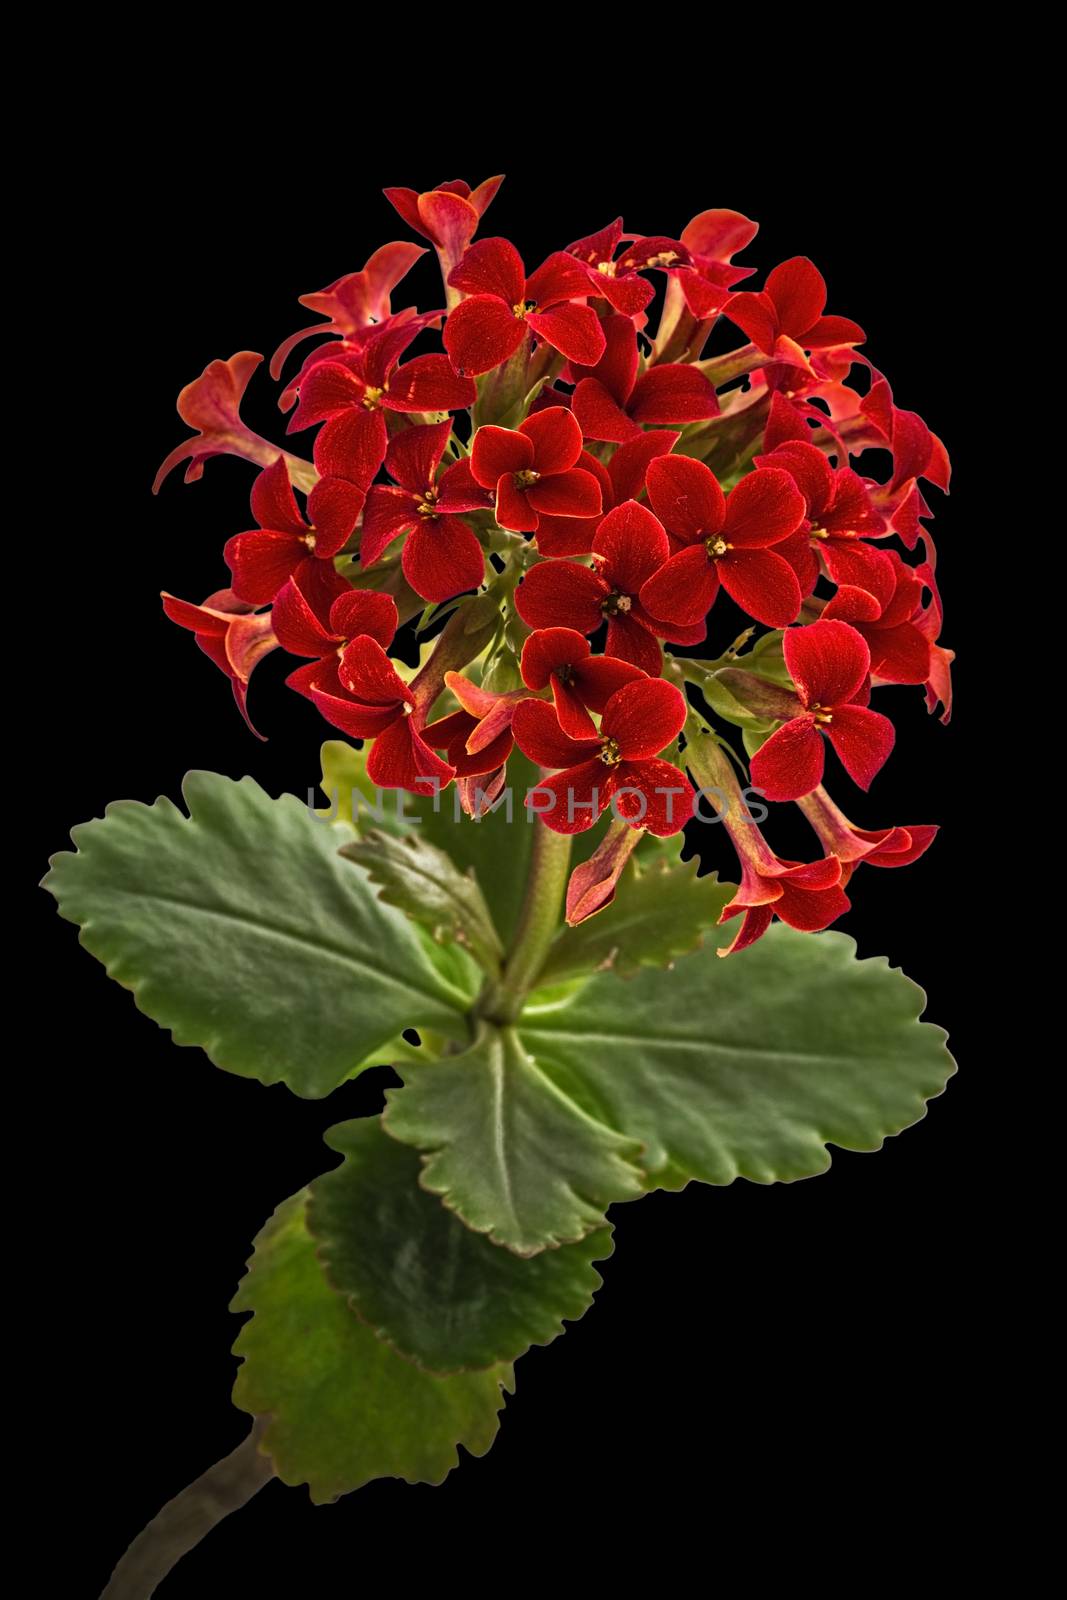 Flower Kalanchoe, tropical succulent, isolated on black backgrou by kostiuchenko